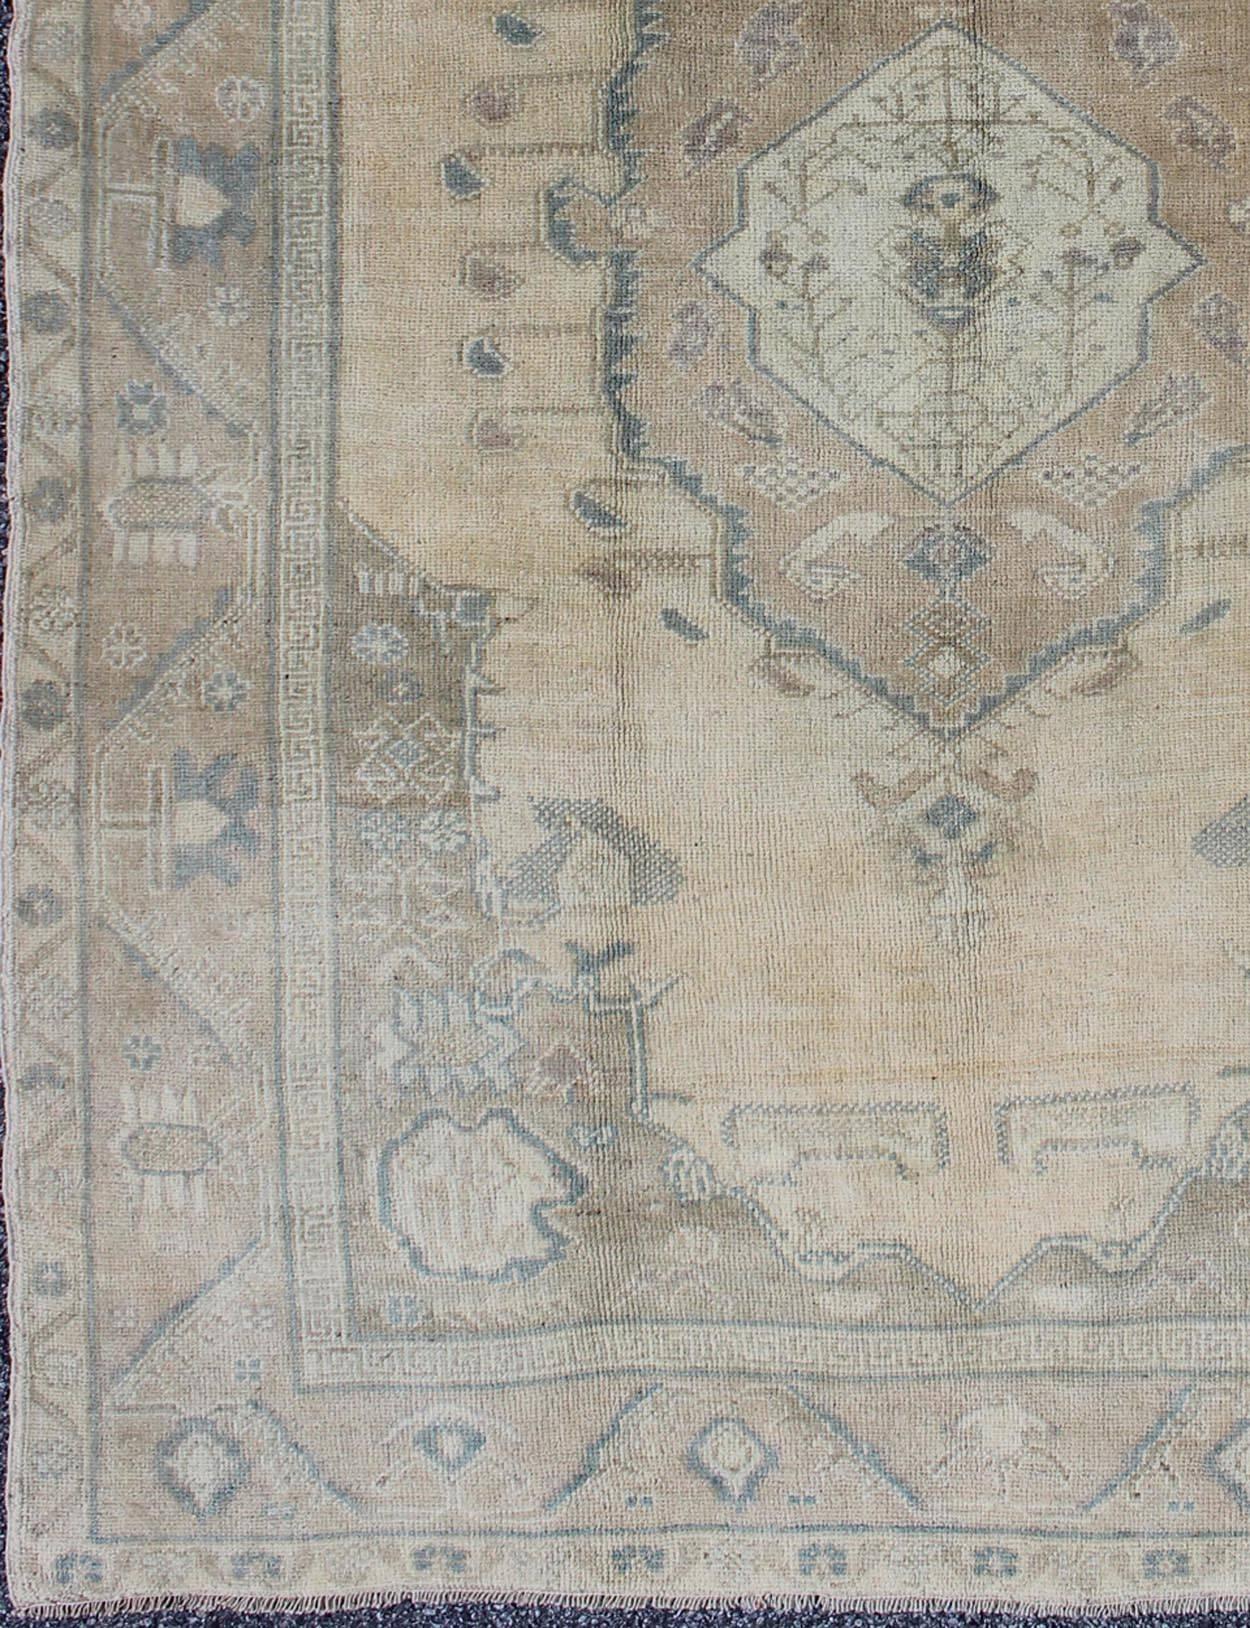 Vintage Turkish Oushak rug with tribal medallion in ivory, camel and gray, rug en-4372, country of origin / type: Turkey / Oushak, circa mid-20th century

This vintage Turkish Oushak rug (circa mid-20th century) features a unique blend of colors